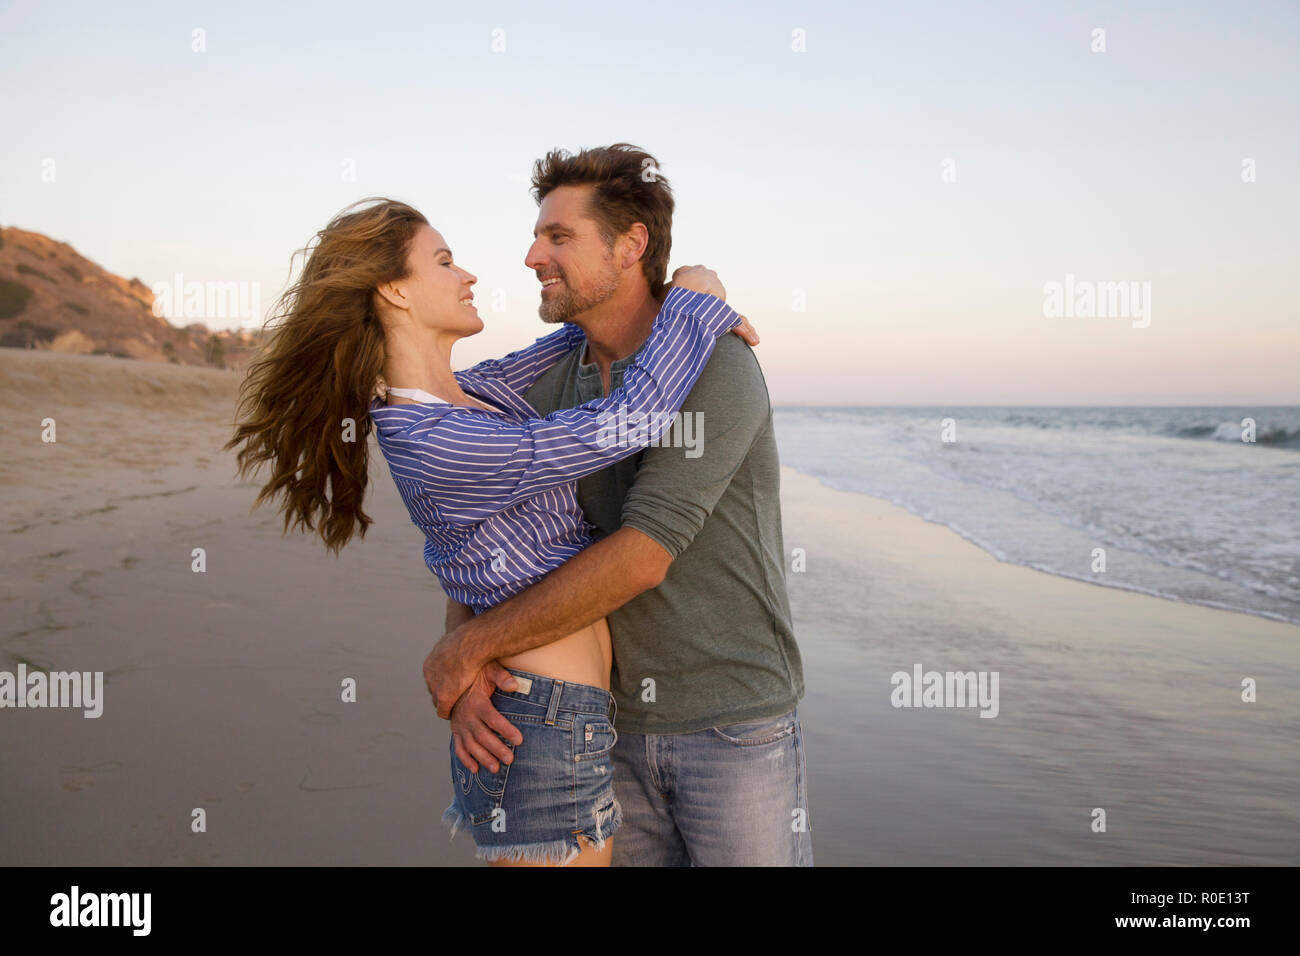 Half-Length Portrait of Romantic Mid-Adult Couple in Each Other's Arms at Beach Stock Photo